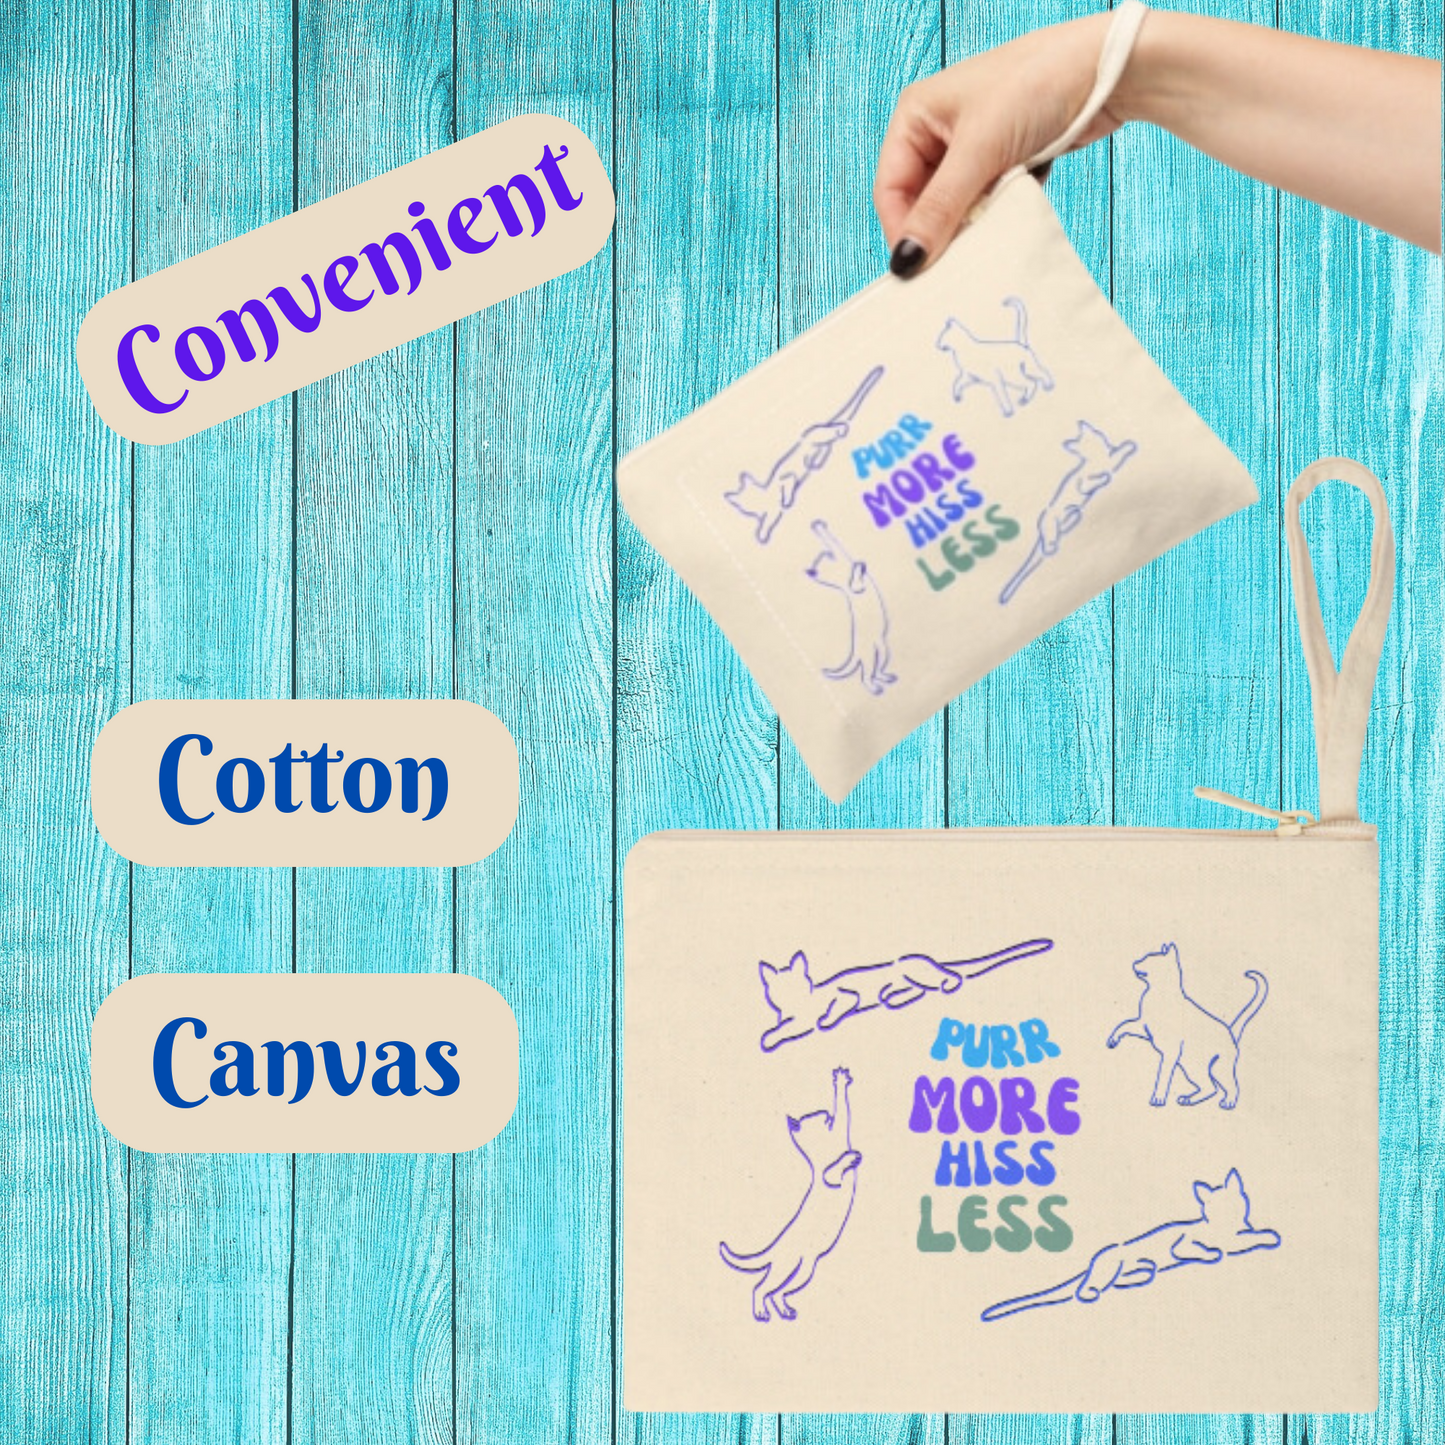 Canvas Cat Lady Tote - "Purr More-Hiss Less" Slogan